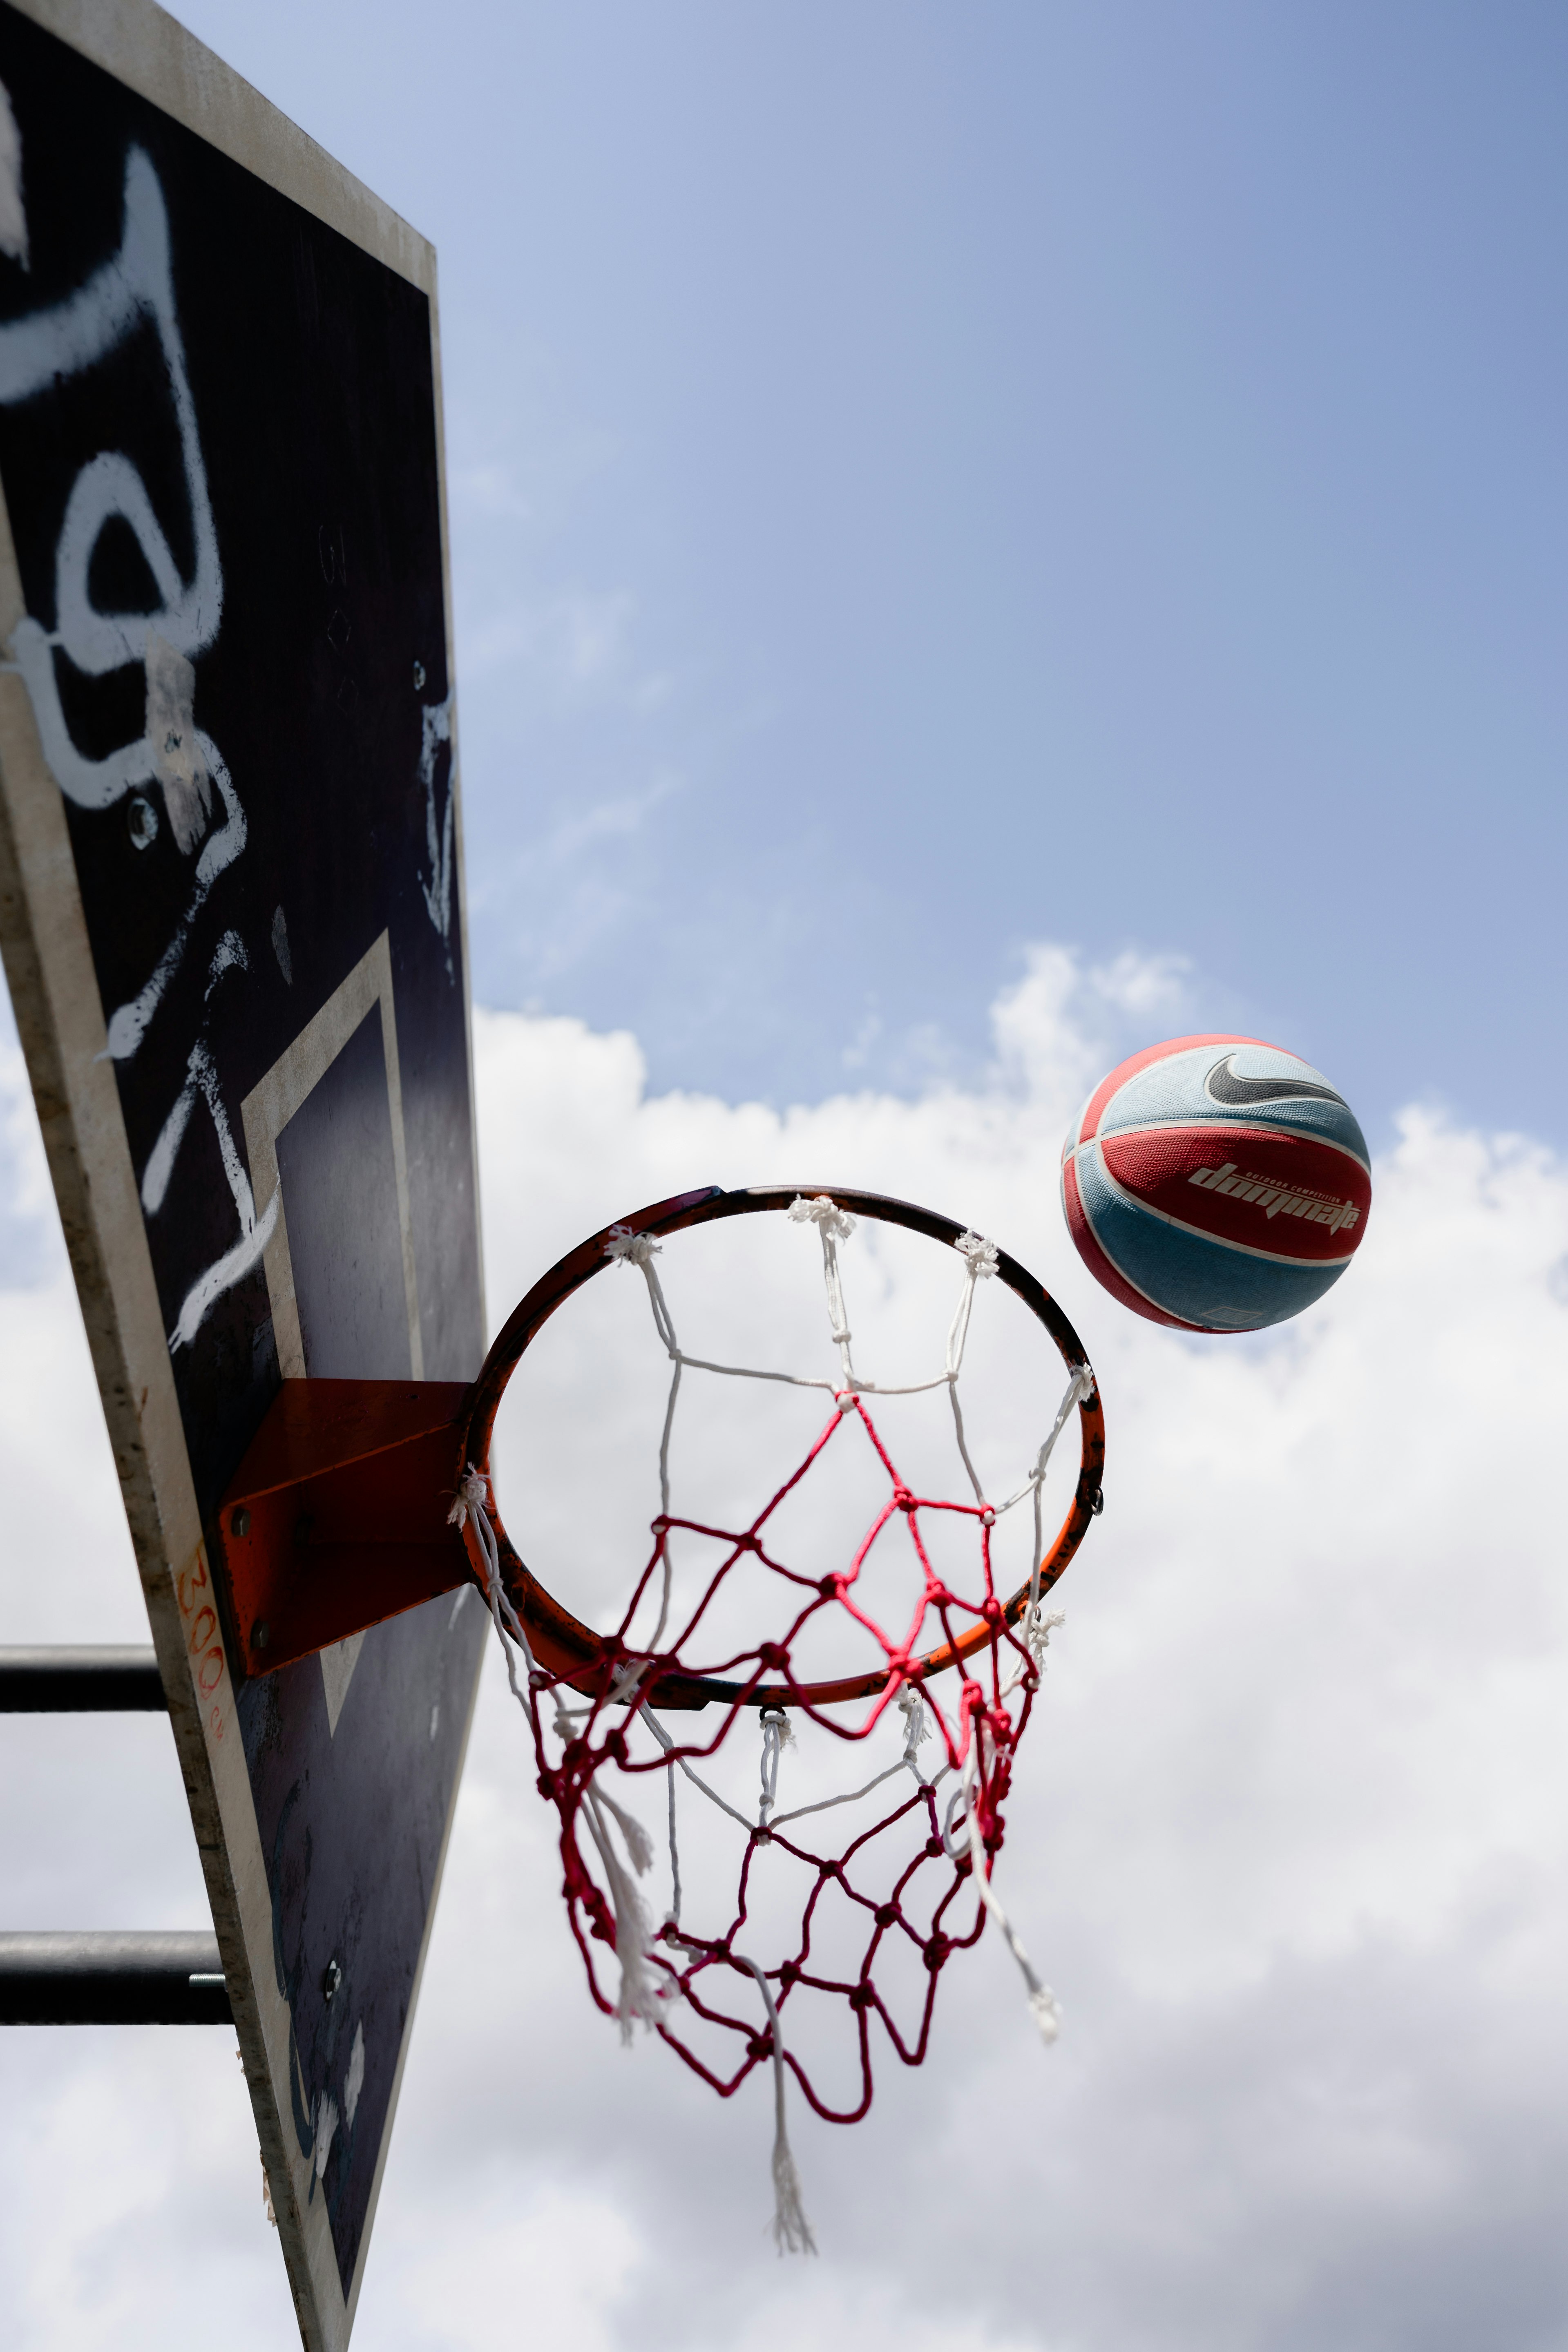 white and red basketball hoop under blue sky during daytime